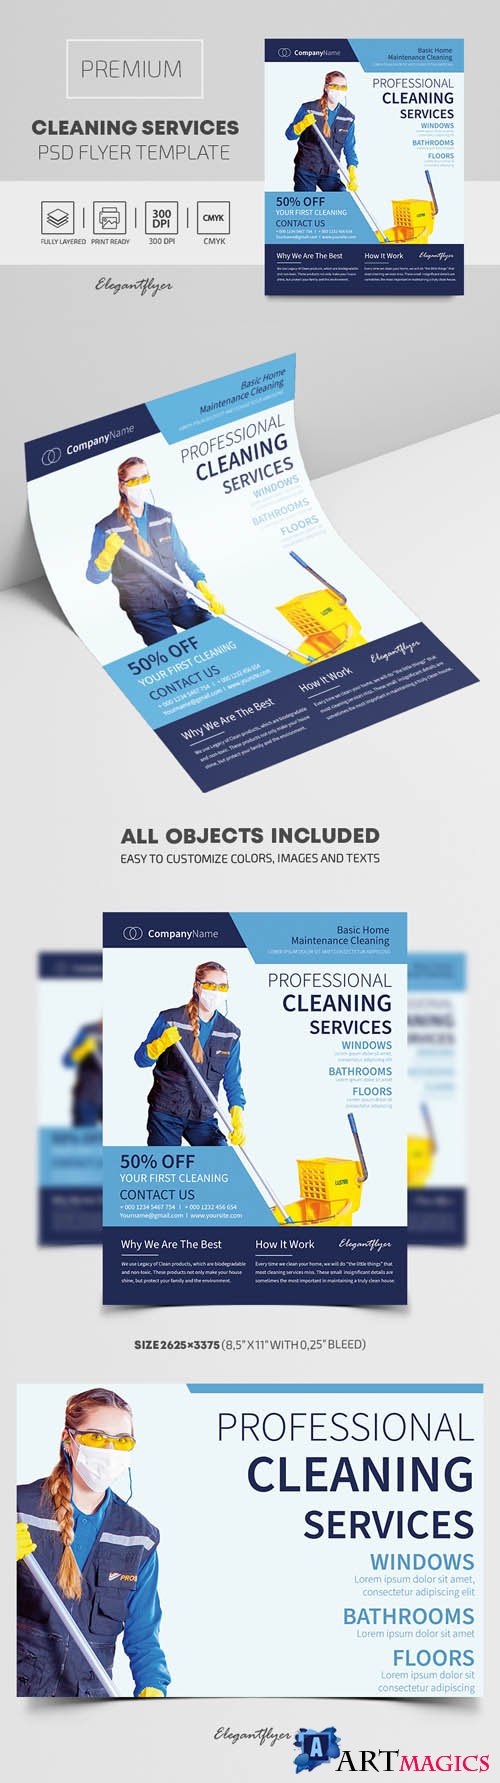 Cleaning Services Premium PSD Flyer Template